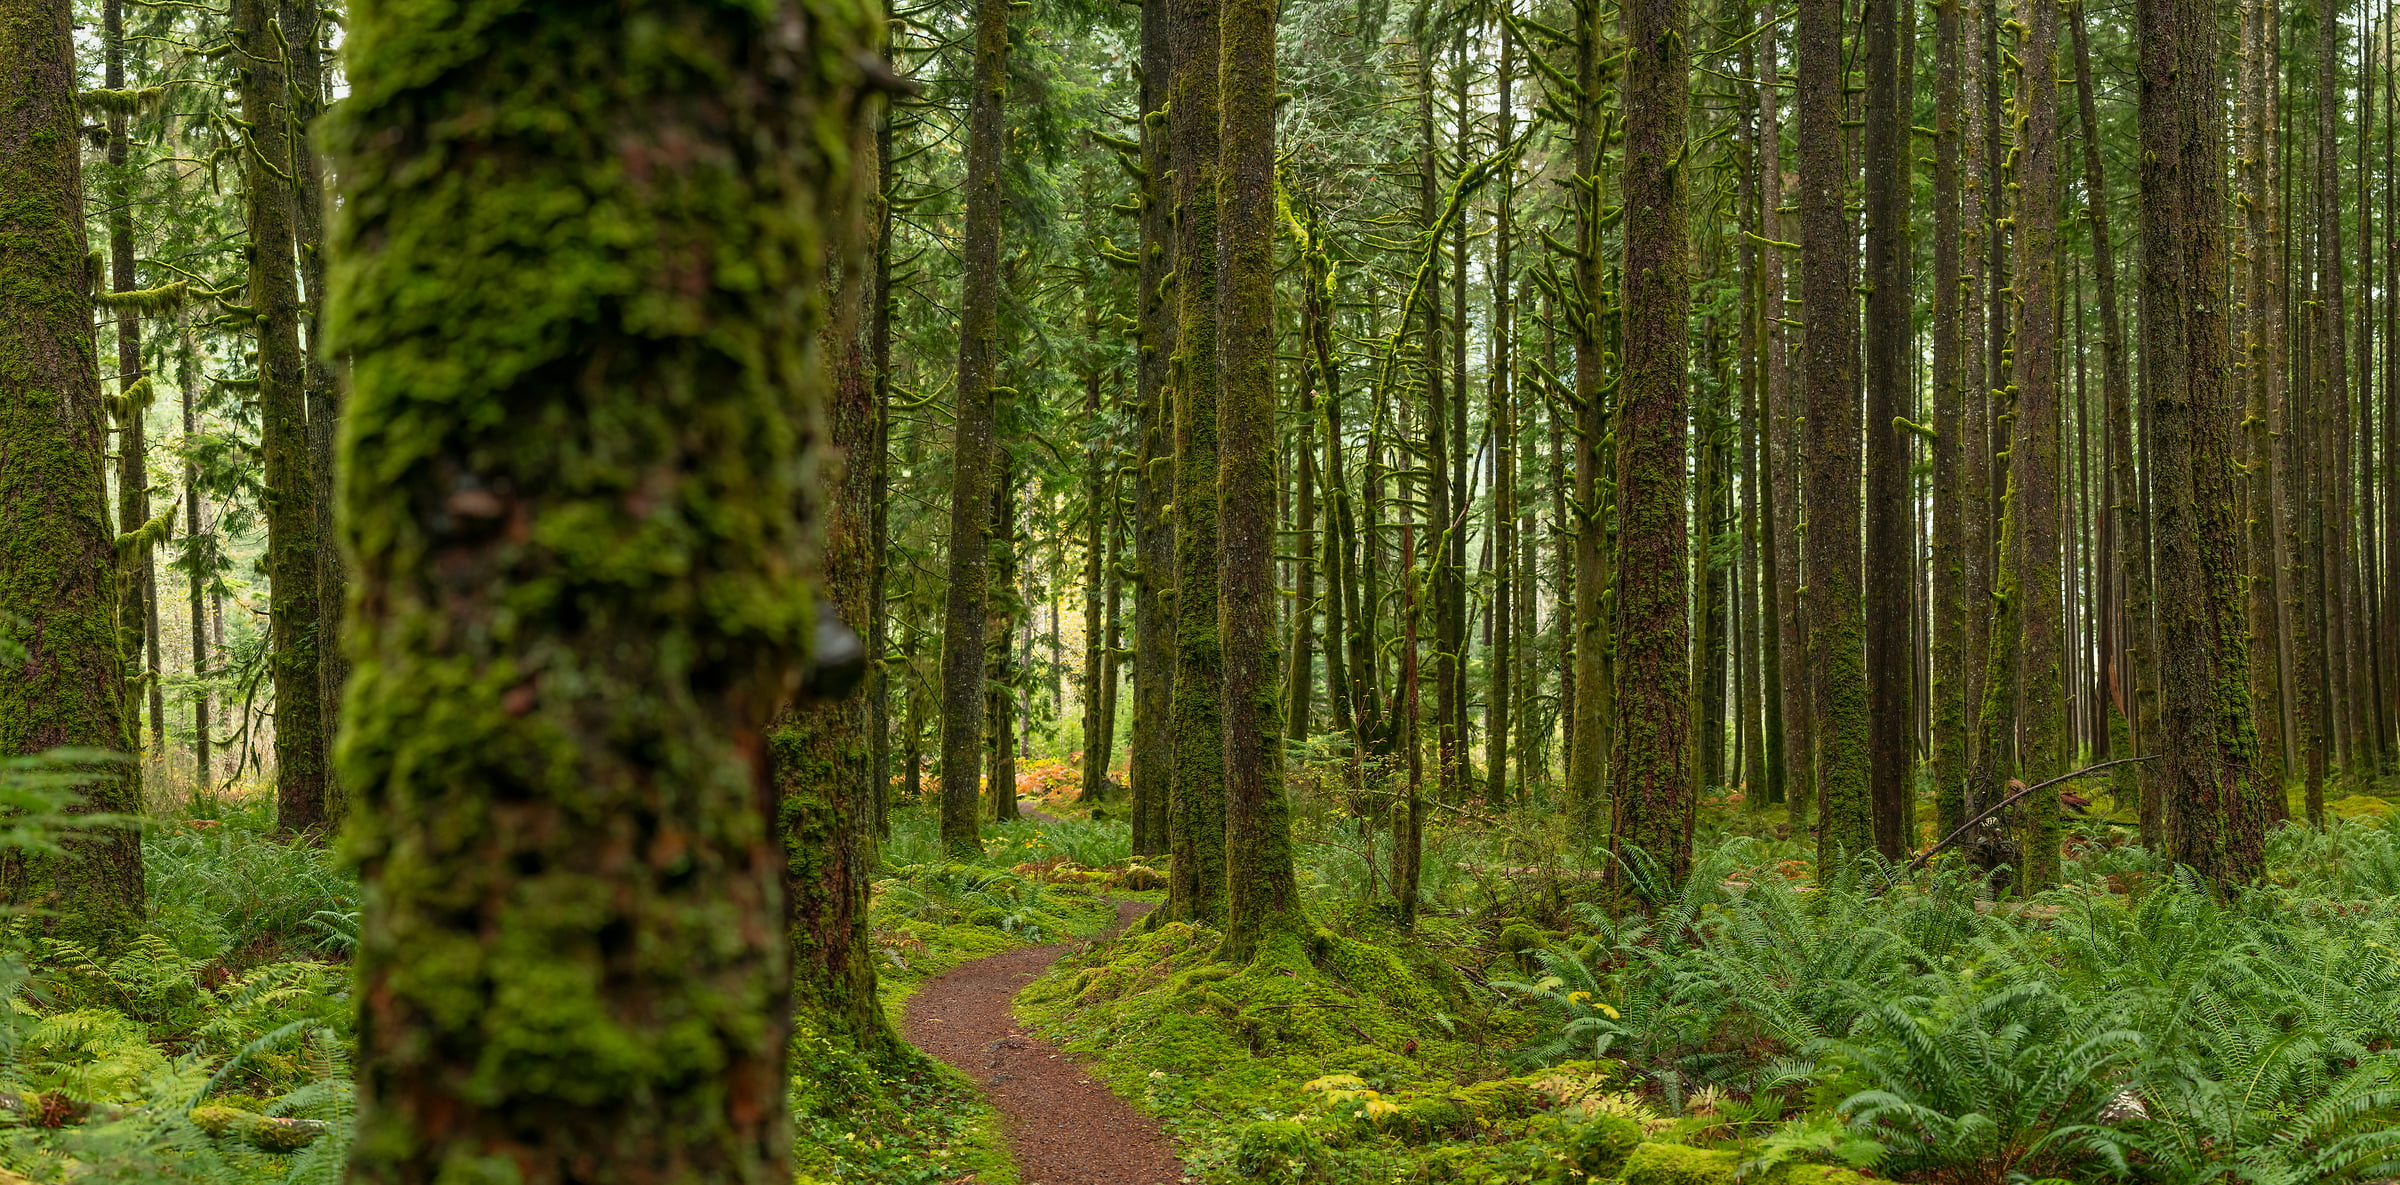 292 megapixels! A very high resolution, large-format VAST photo print of a winding pathway in a forest; nature photograph created by Scott Rinckenberger in CCC Trail, Middle Fork Trailhead, Middle Fork of the Snoqualmie River, Washington.